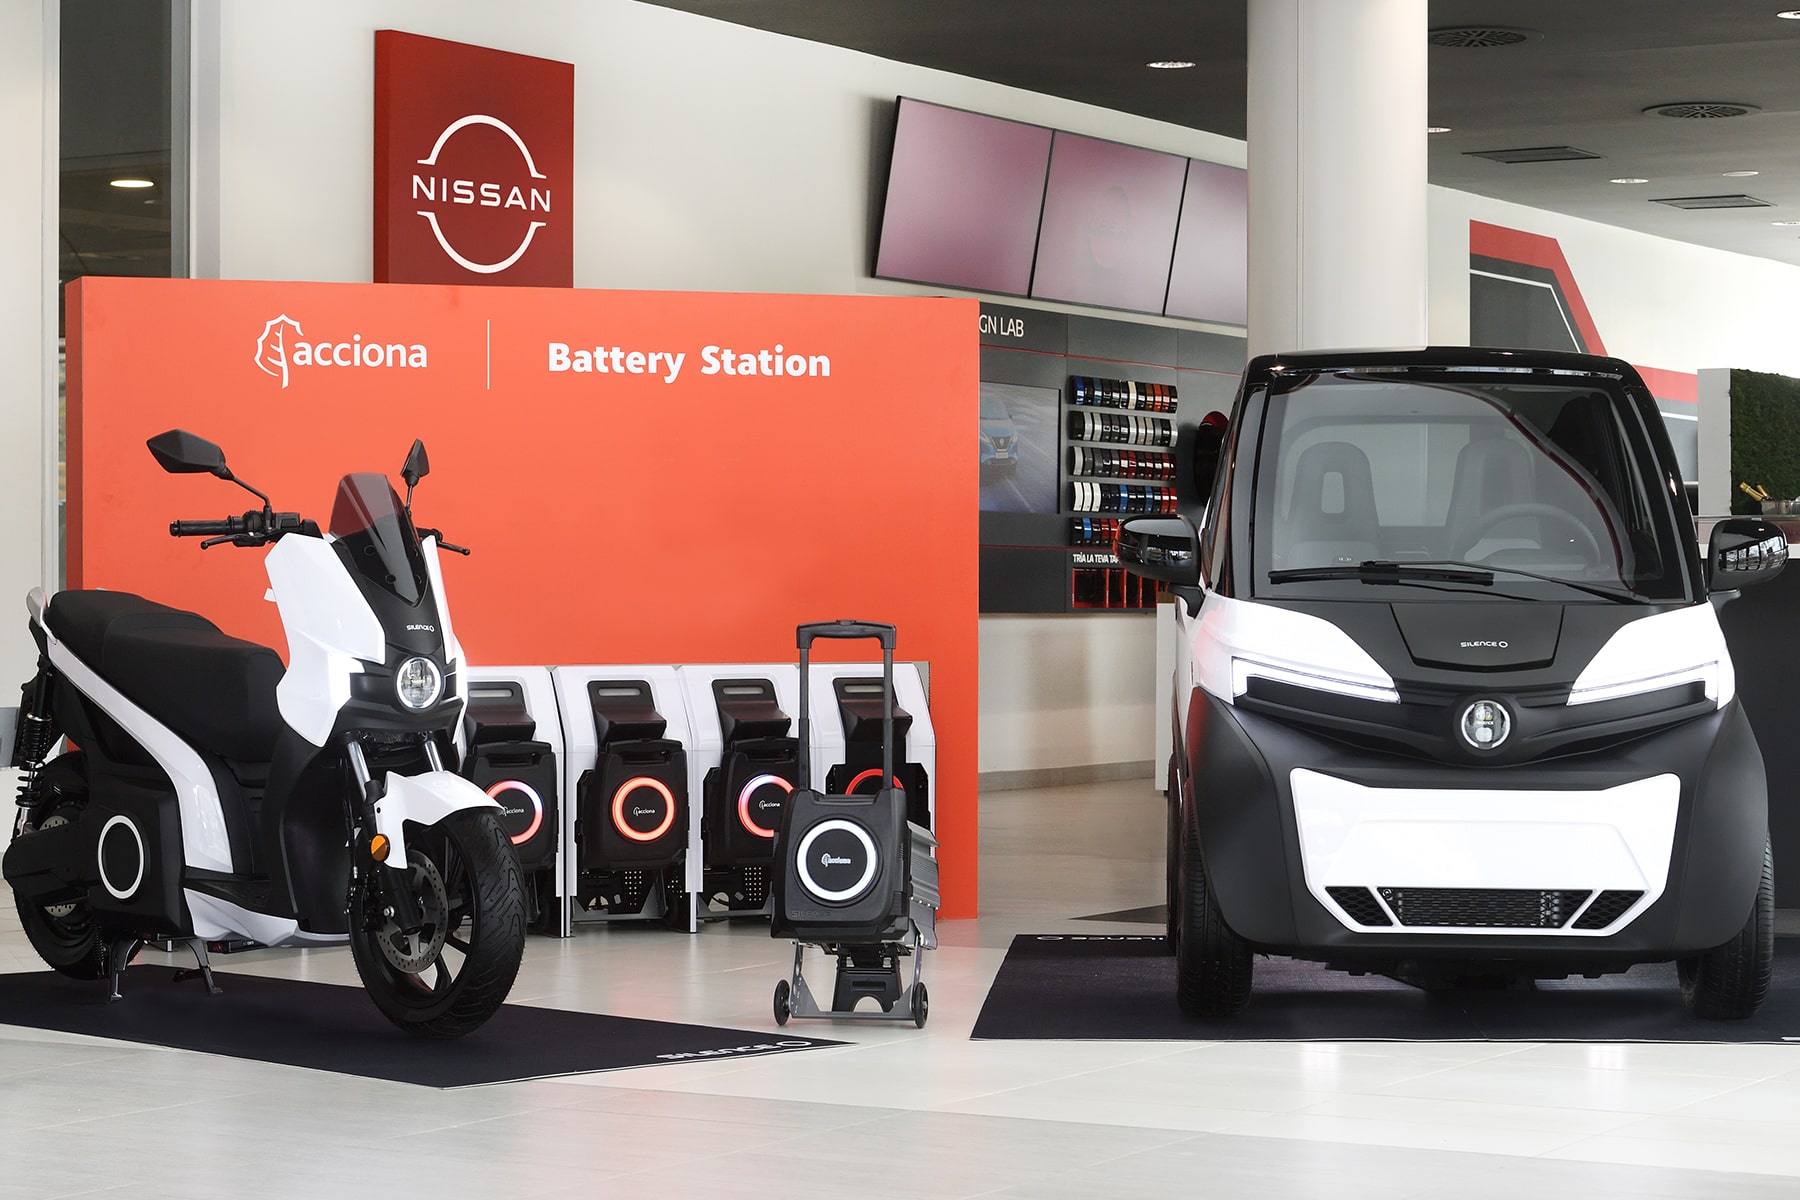 Nissan to distribute Silence’s compact electric vehicles in Europe